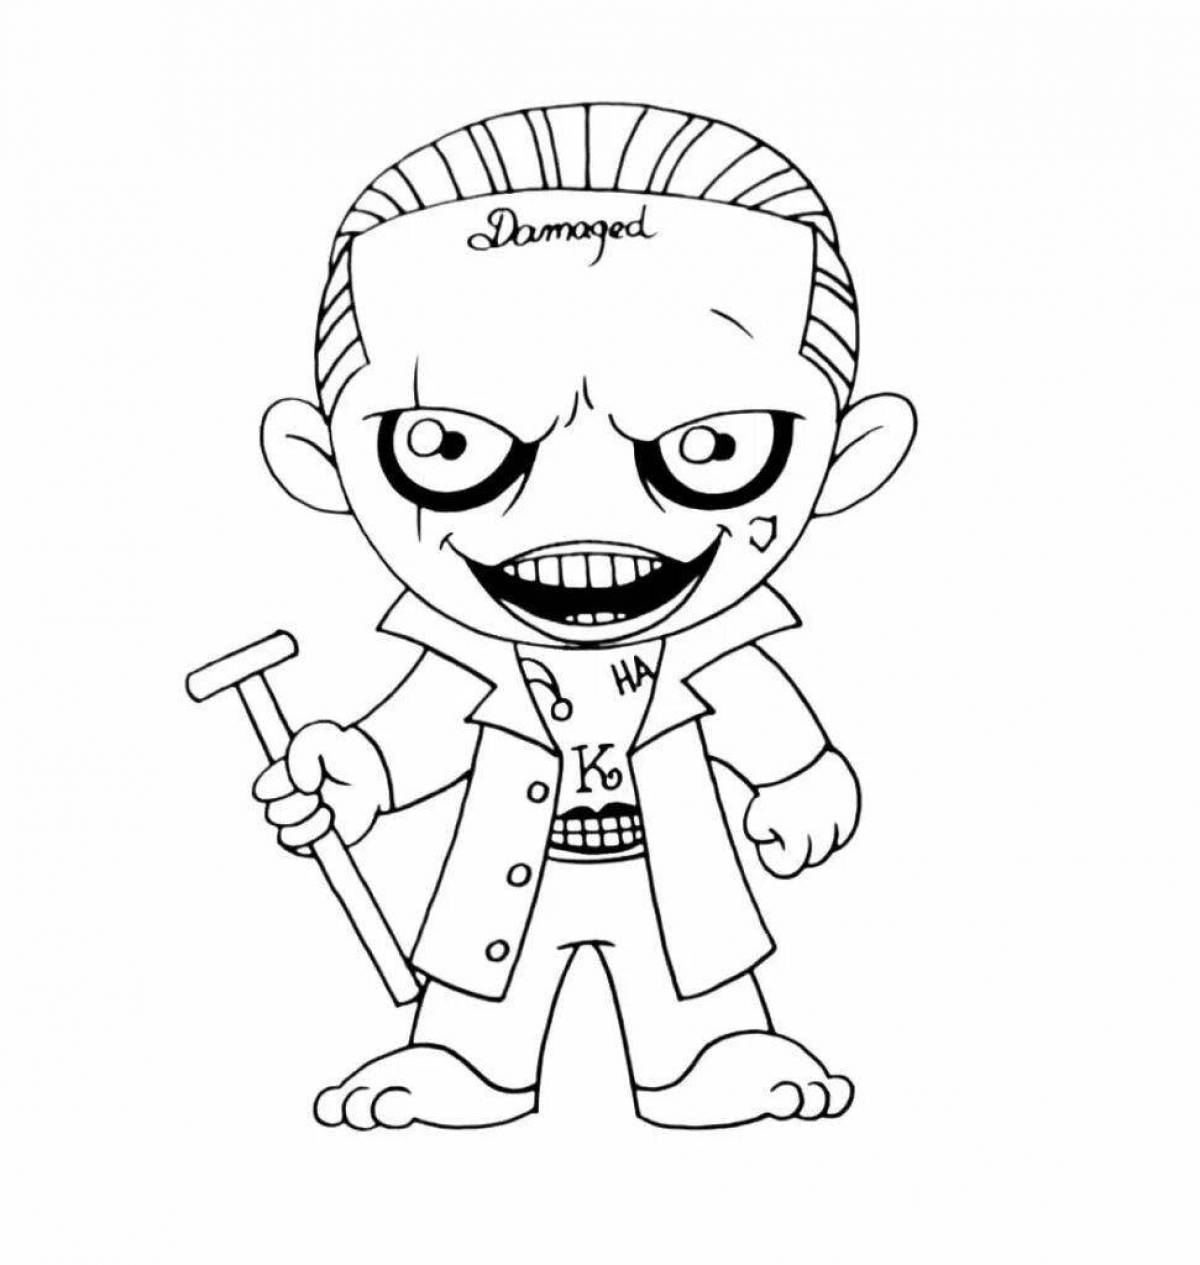 Animated joker coloring book for kids